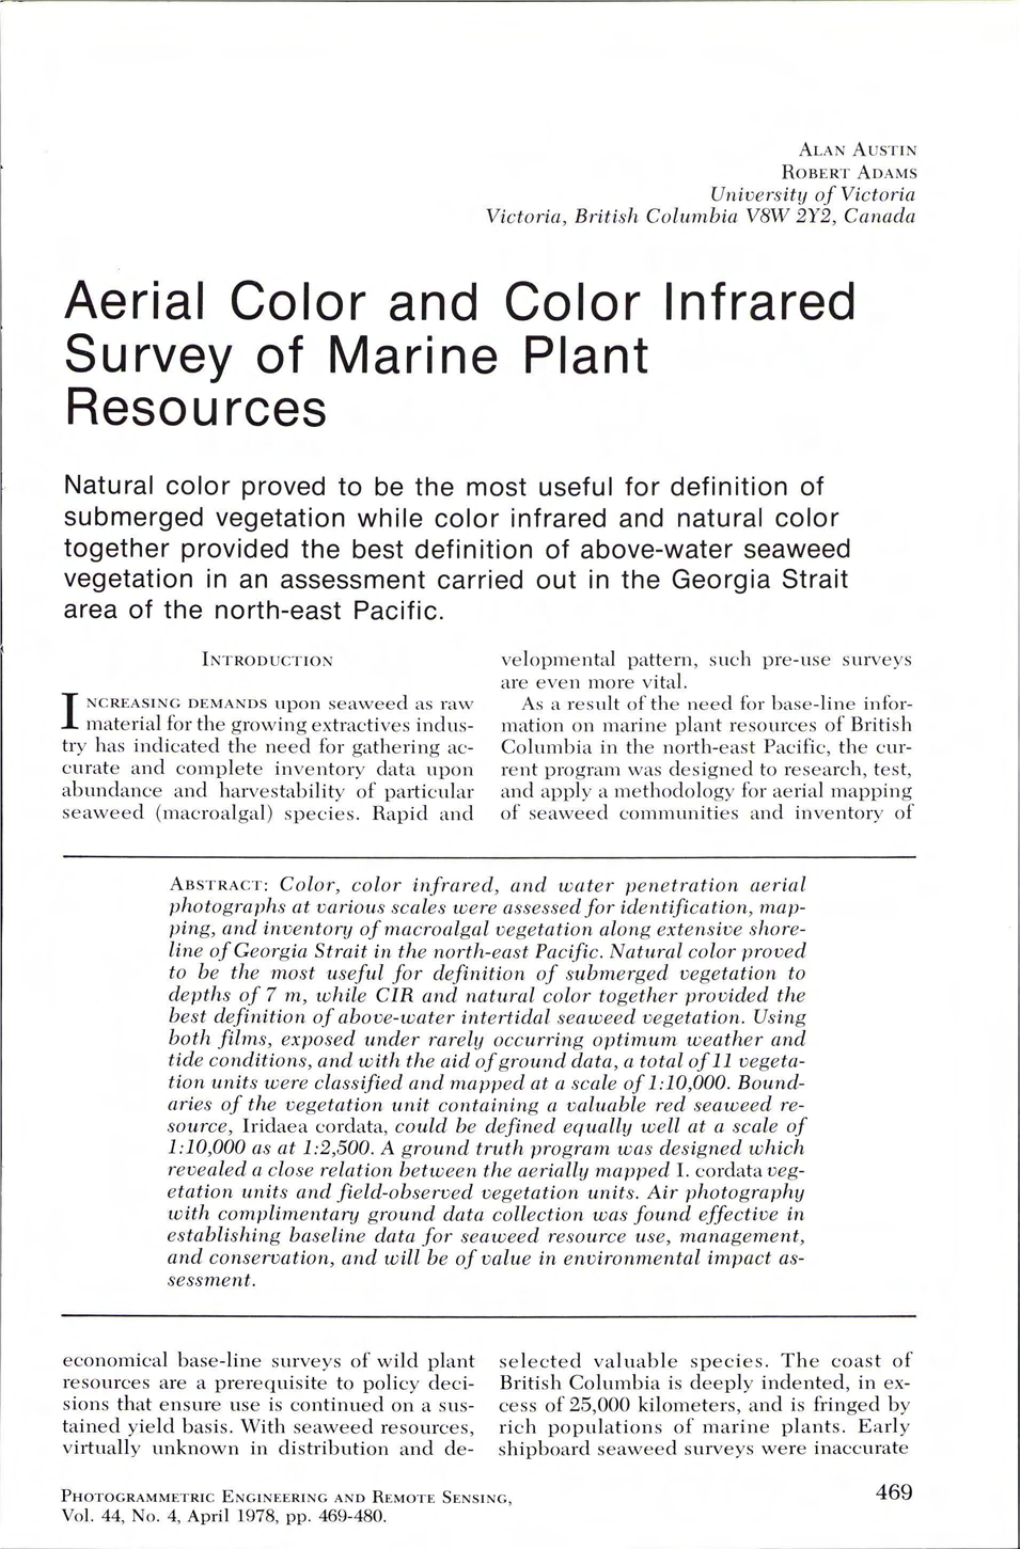 Aerial Color and Color Infrared Survey of Marine Plant Resources